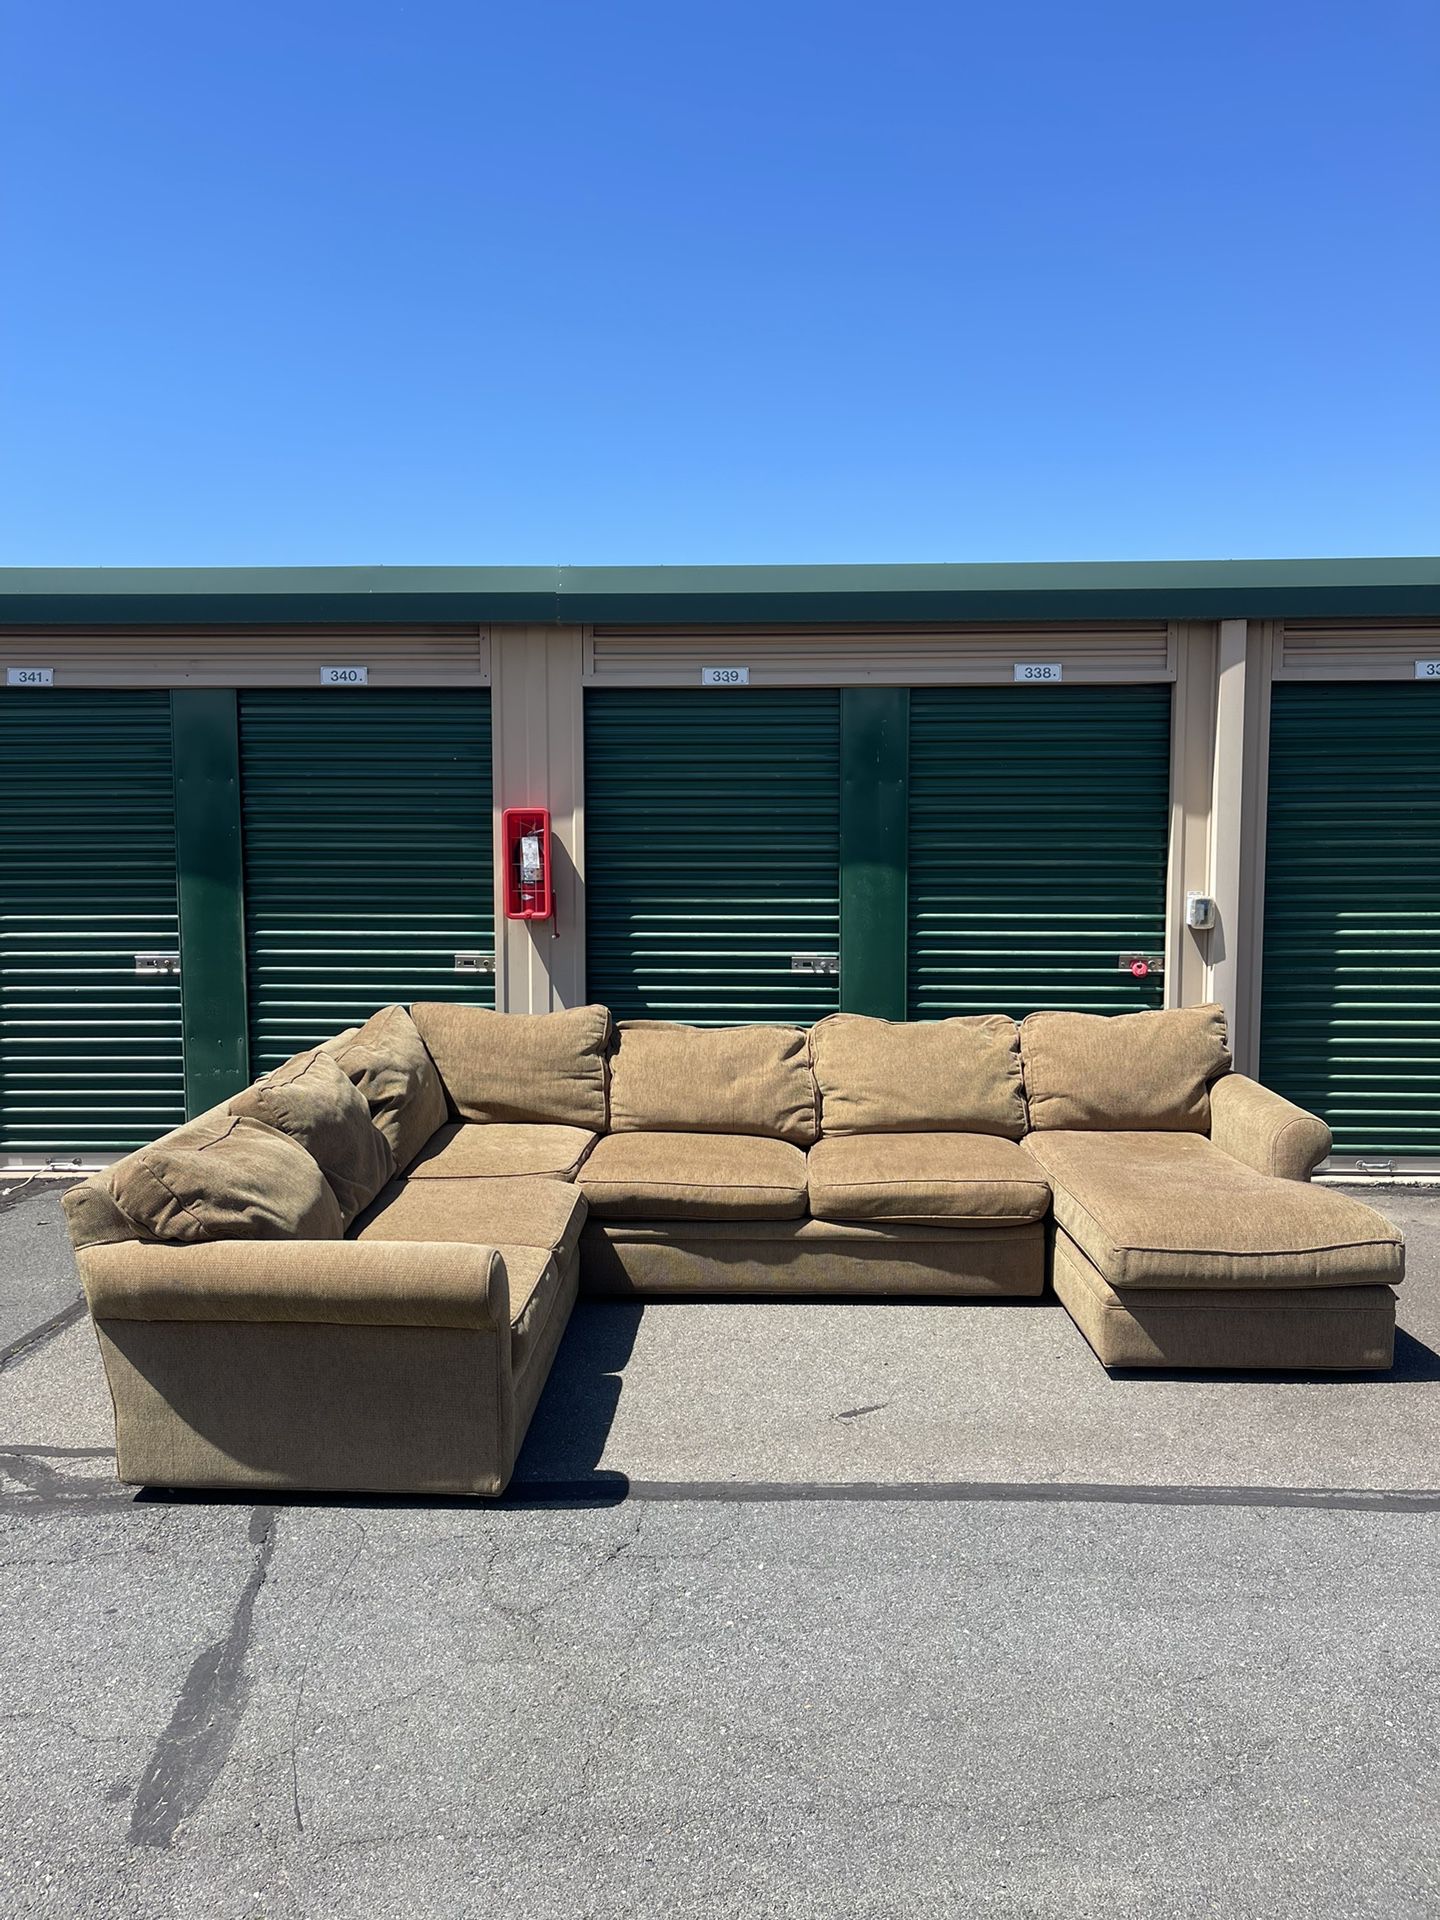 Free Delivery! Beautiful Modular Crate and Barrel Sectional sofa/couch with Chaise!